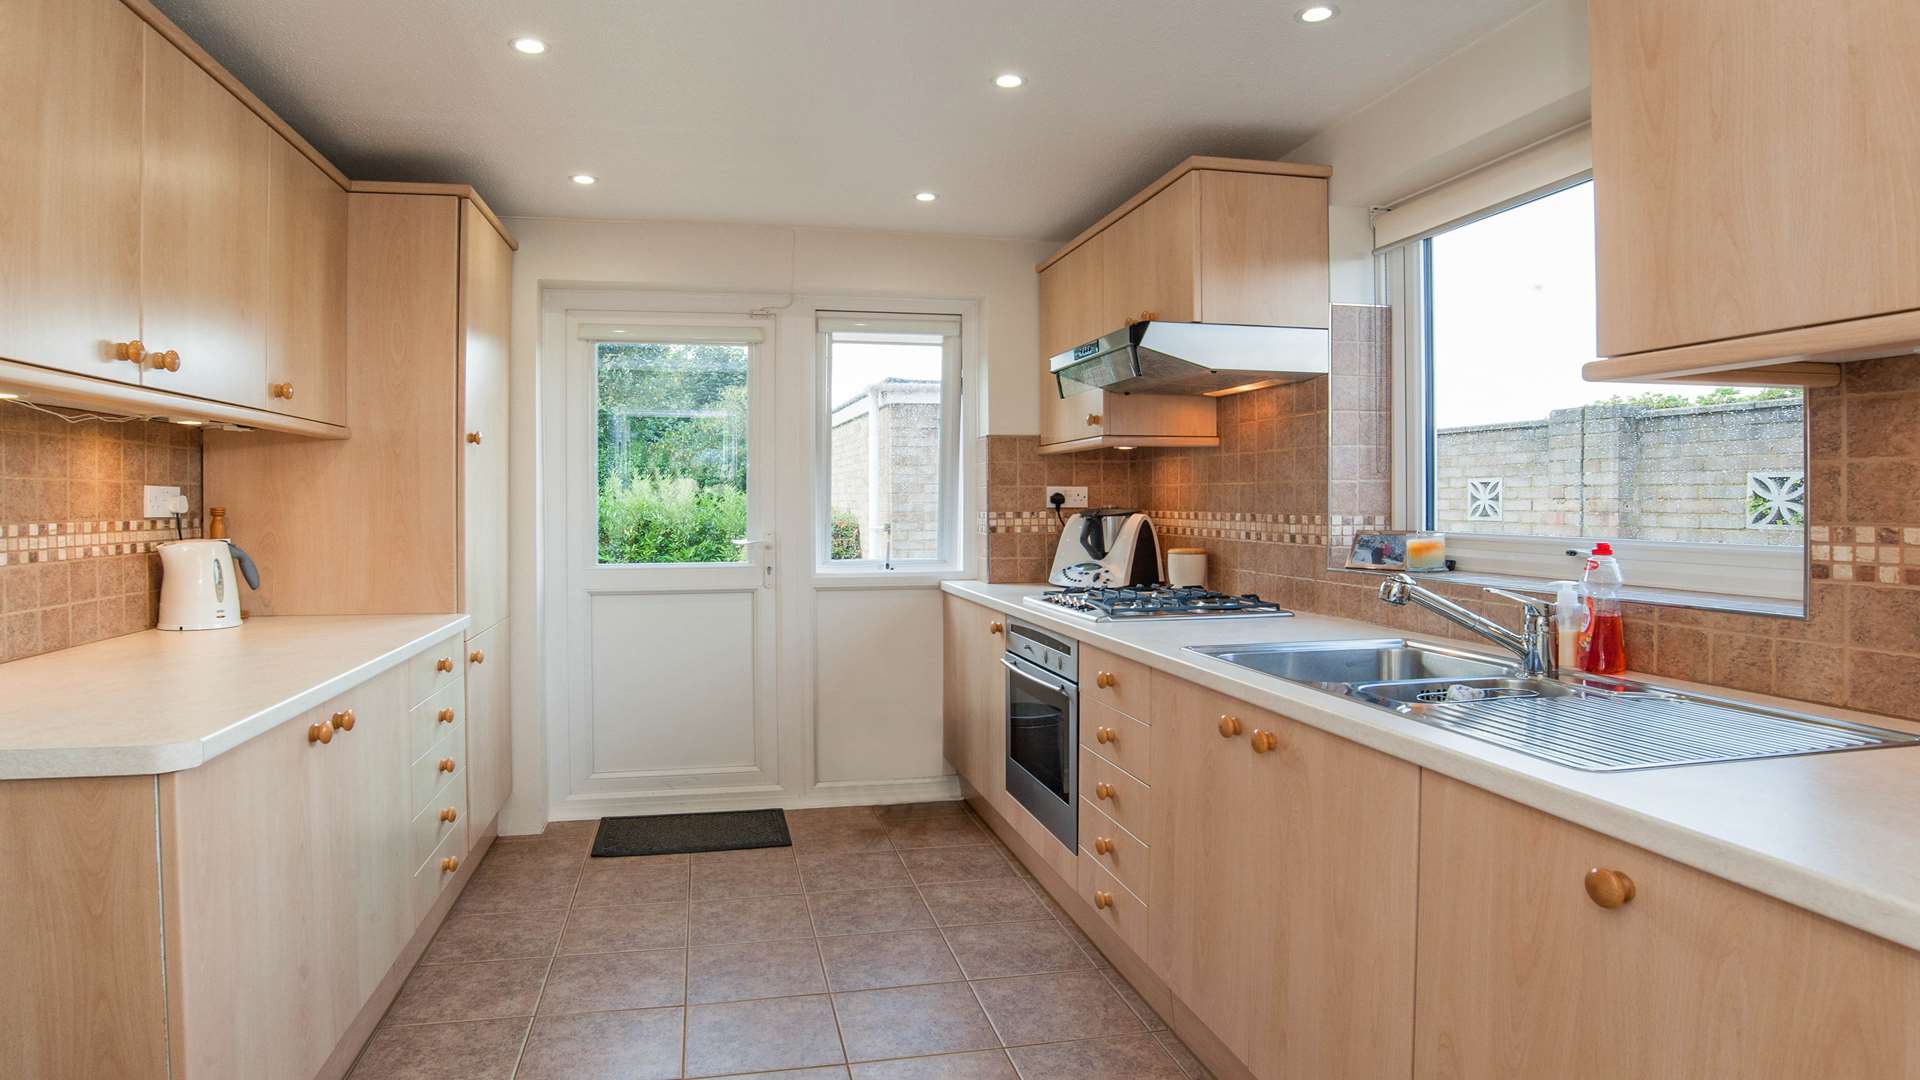 The kitchen at the property in Forest Hill, Maidstone